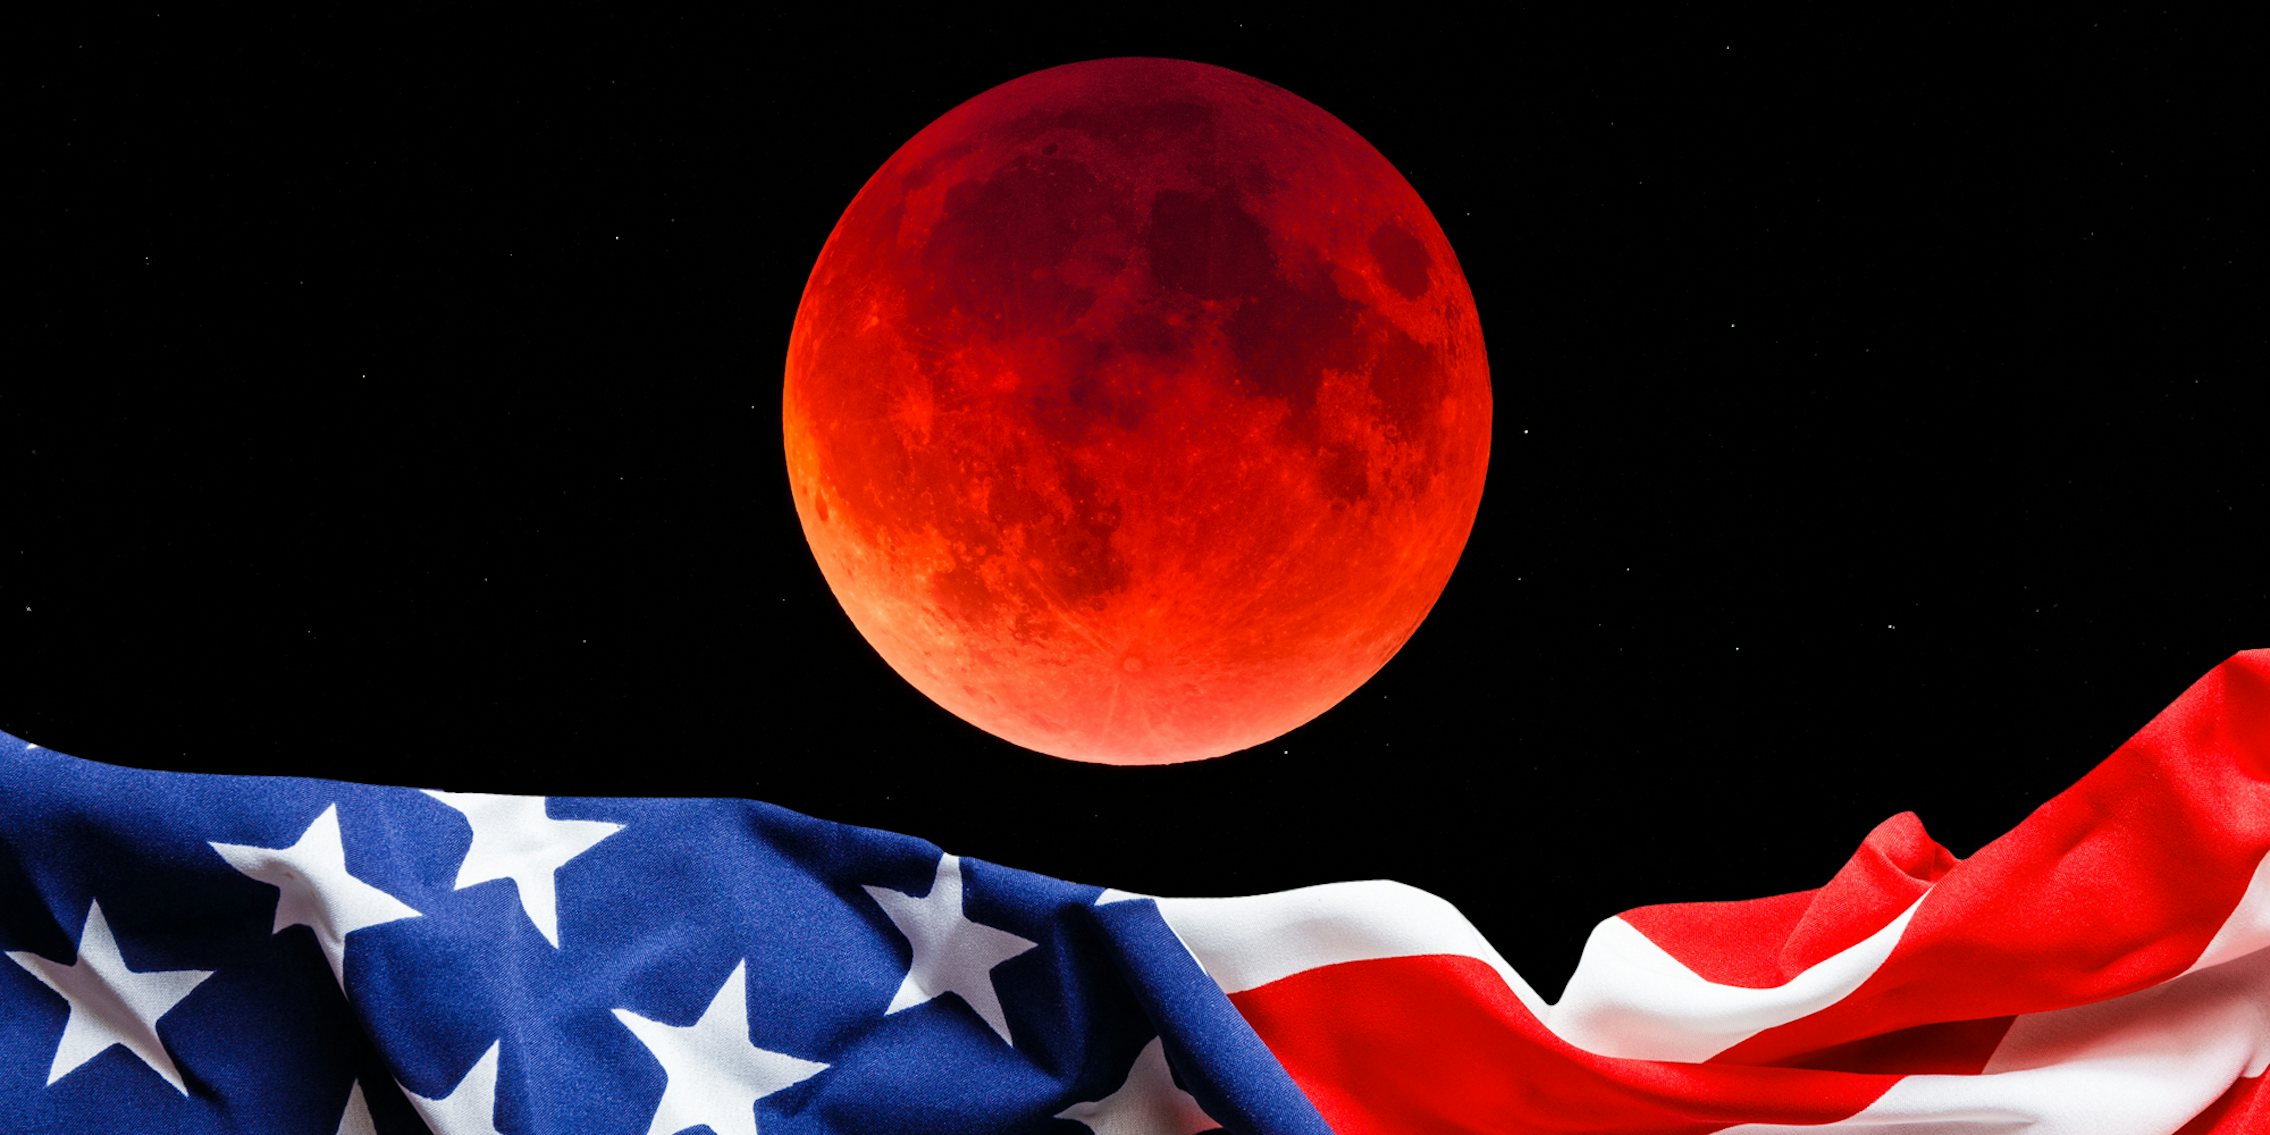 Blood moon eclipse with American flag at bottom